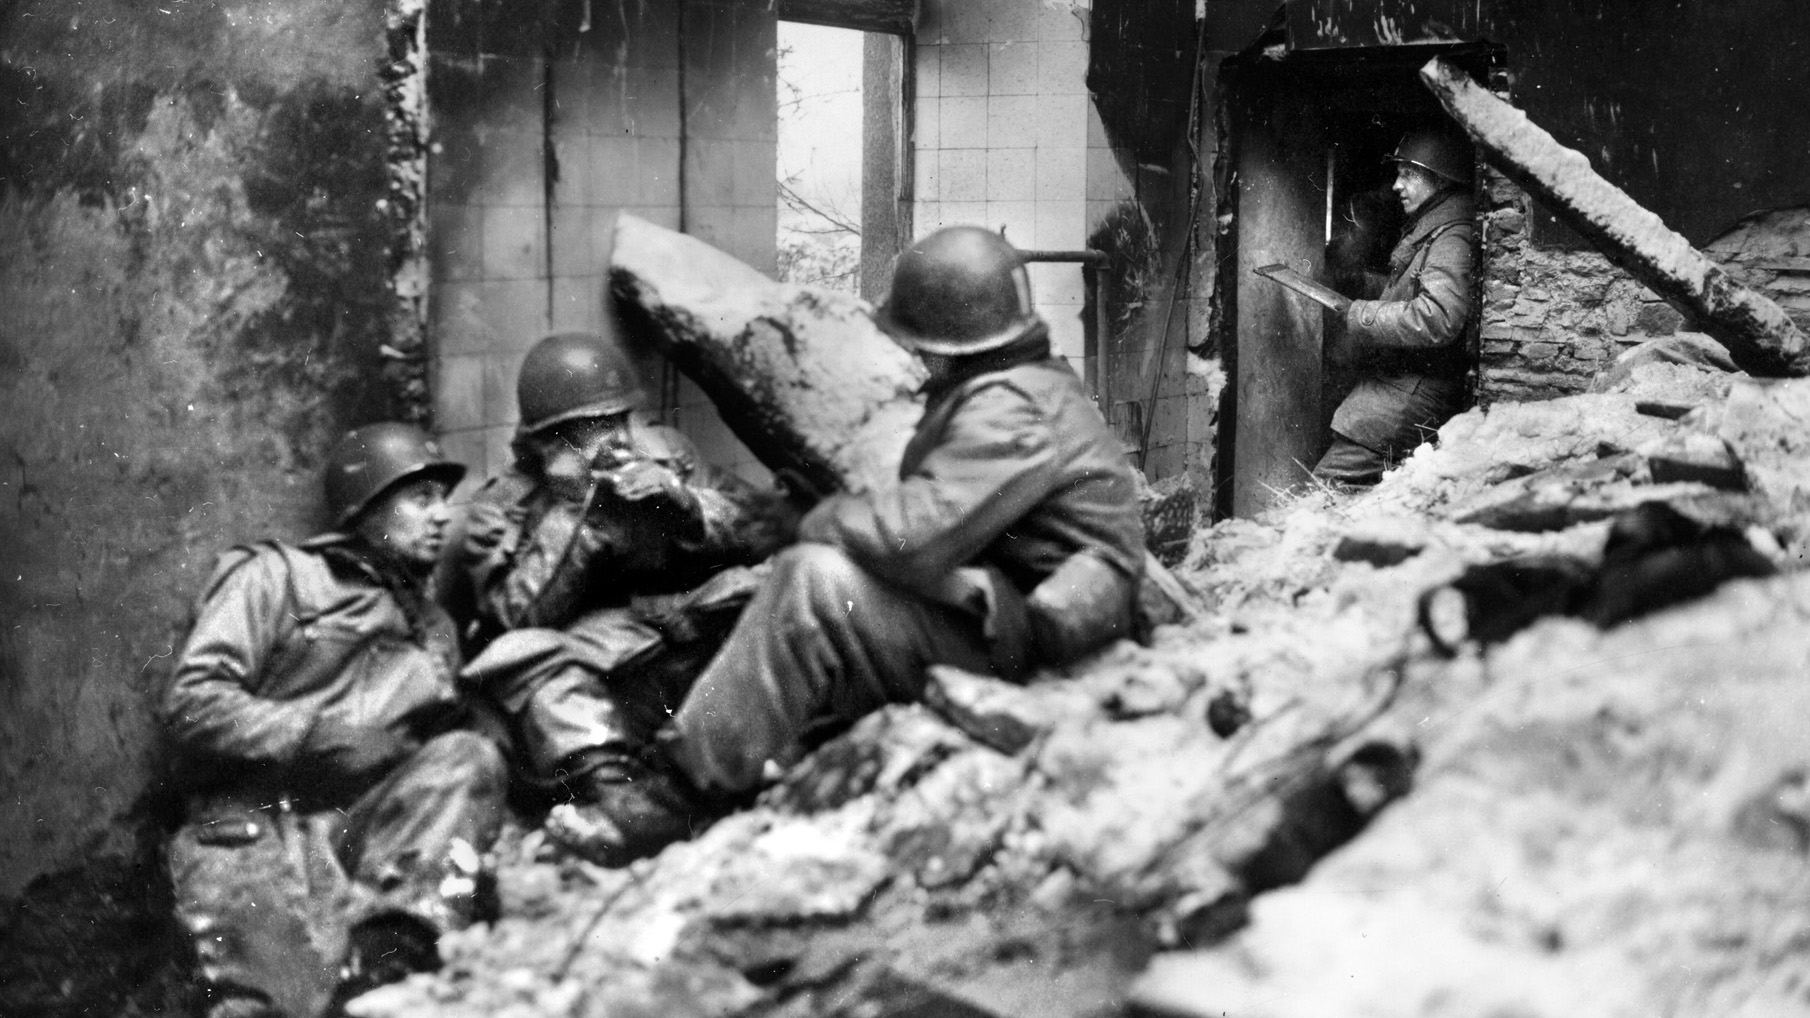 Myers noted that foxholes and the ruins of buildings in Weiler often became the only shelter from the harsh weather conditions. Here an American officer (second from left) uses a field phone to communicate with higher headquarters.